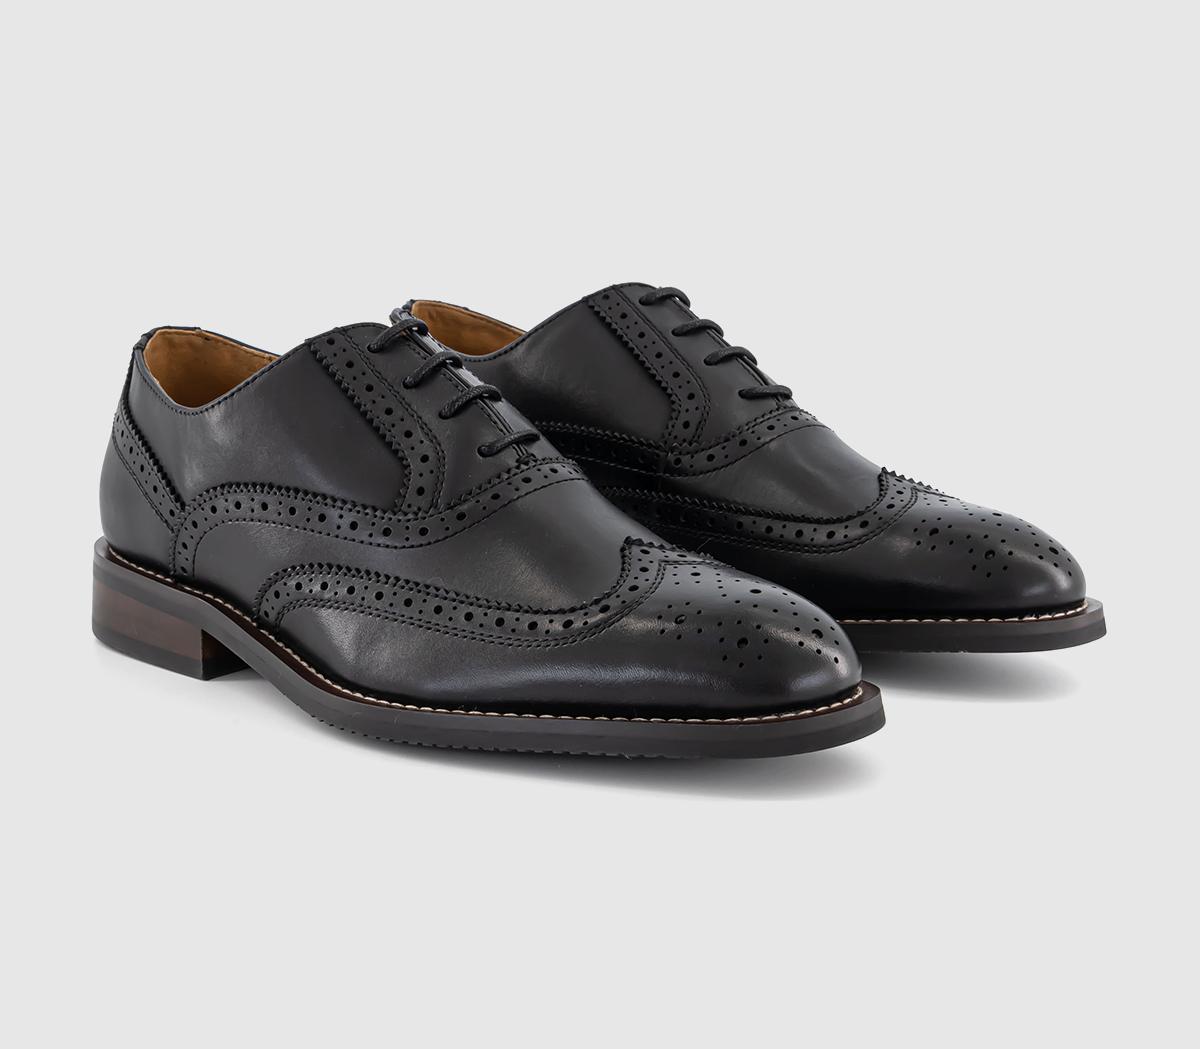 OFFICE Mens Mariner Wingcap Brogue Shoes Black Leather, 9